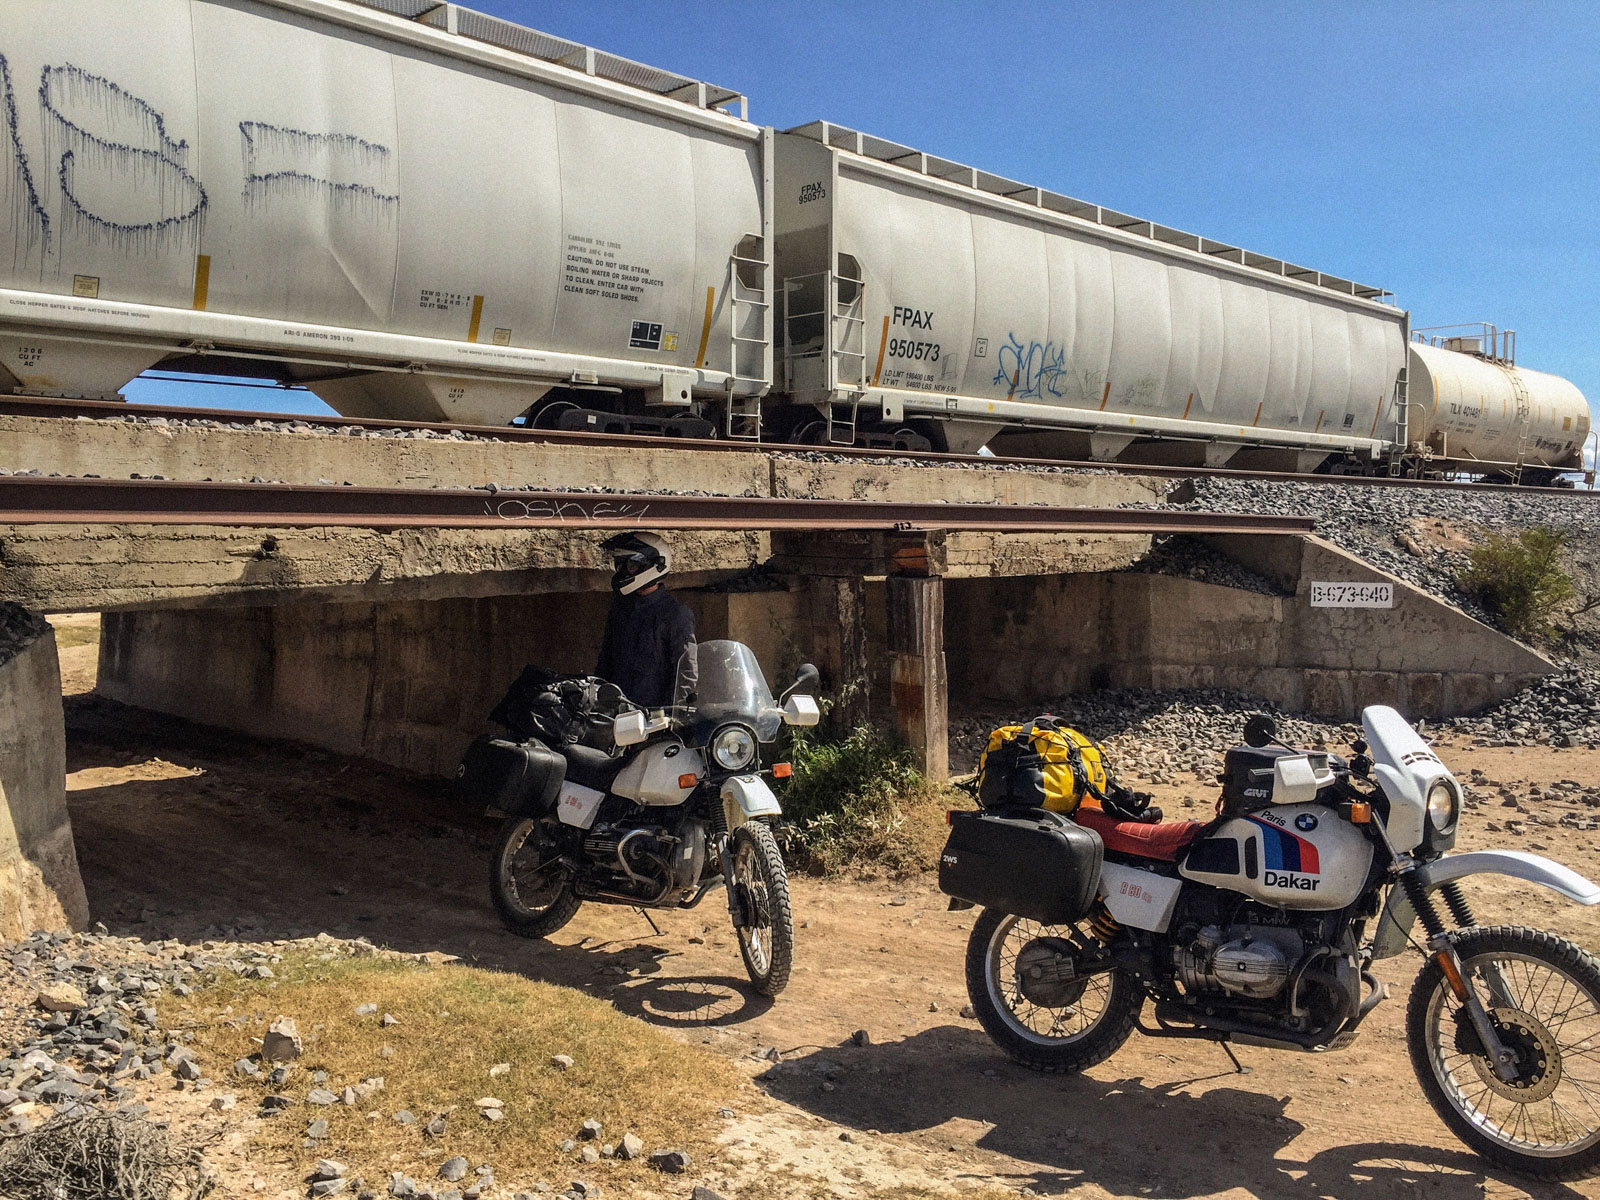 2-Wadley-Station-Mexico-Passing-under-railway